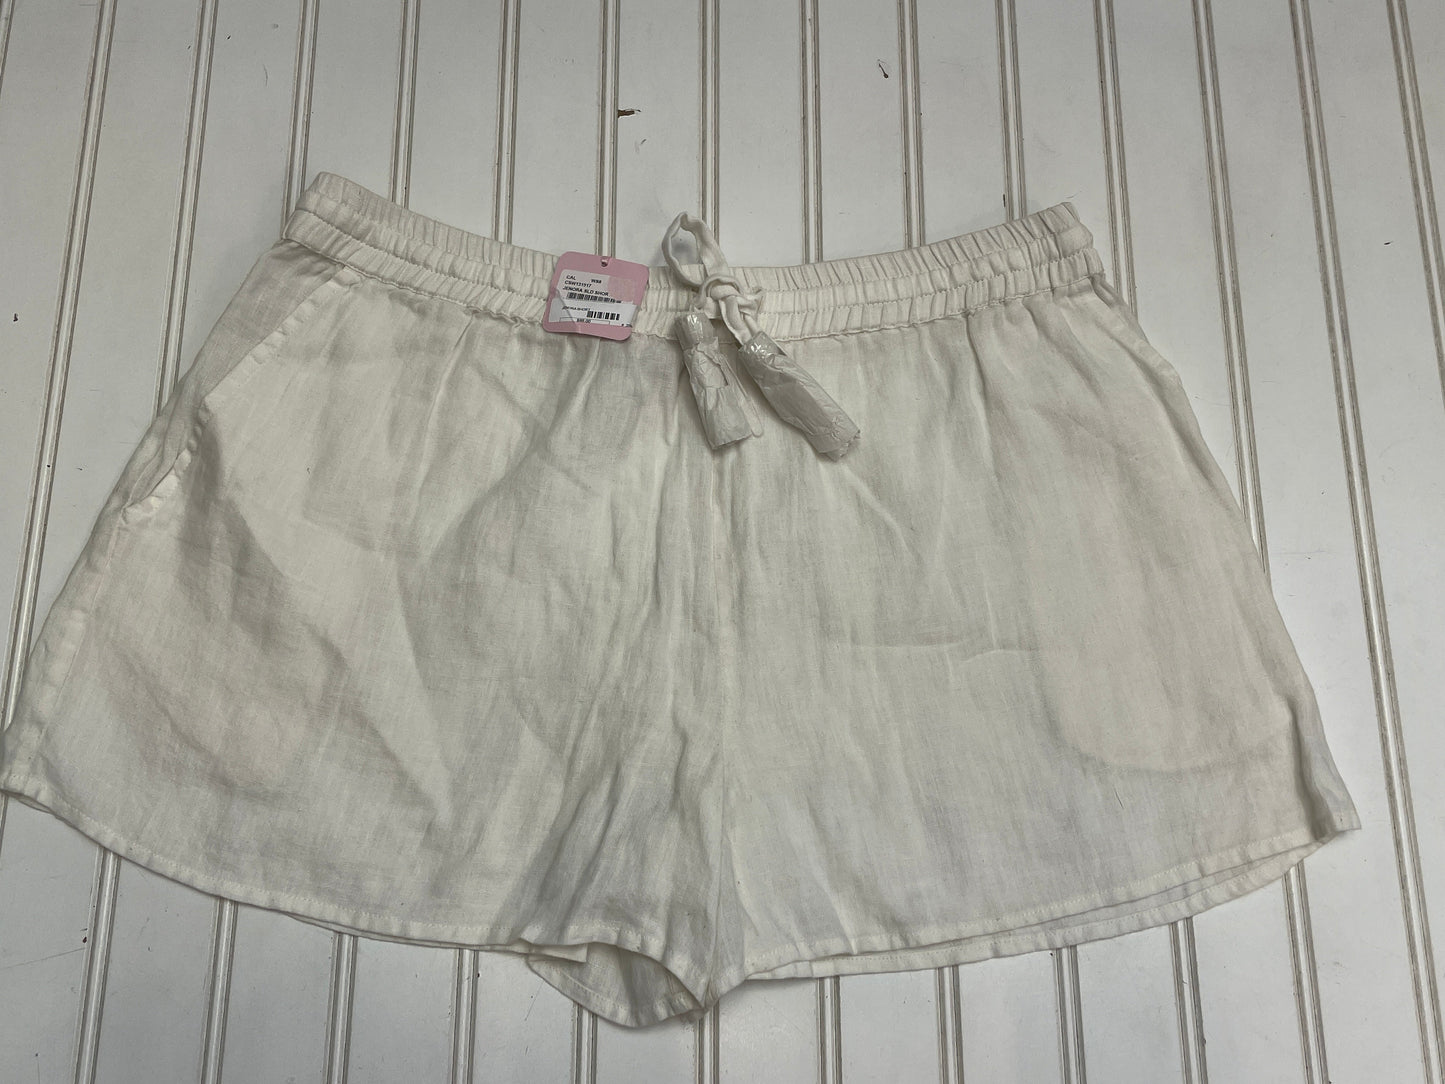 Shorts By Calypso St Barth  Size: M